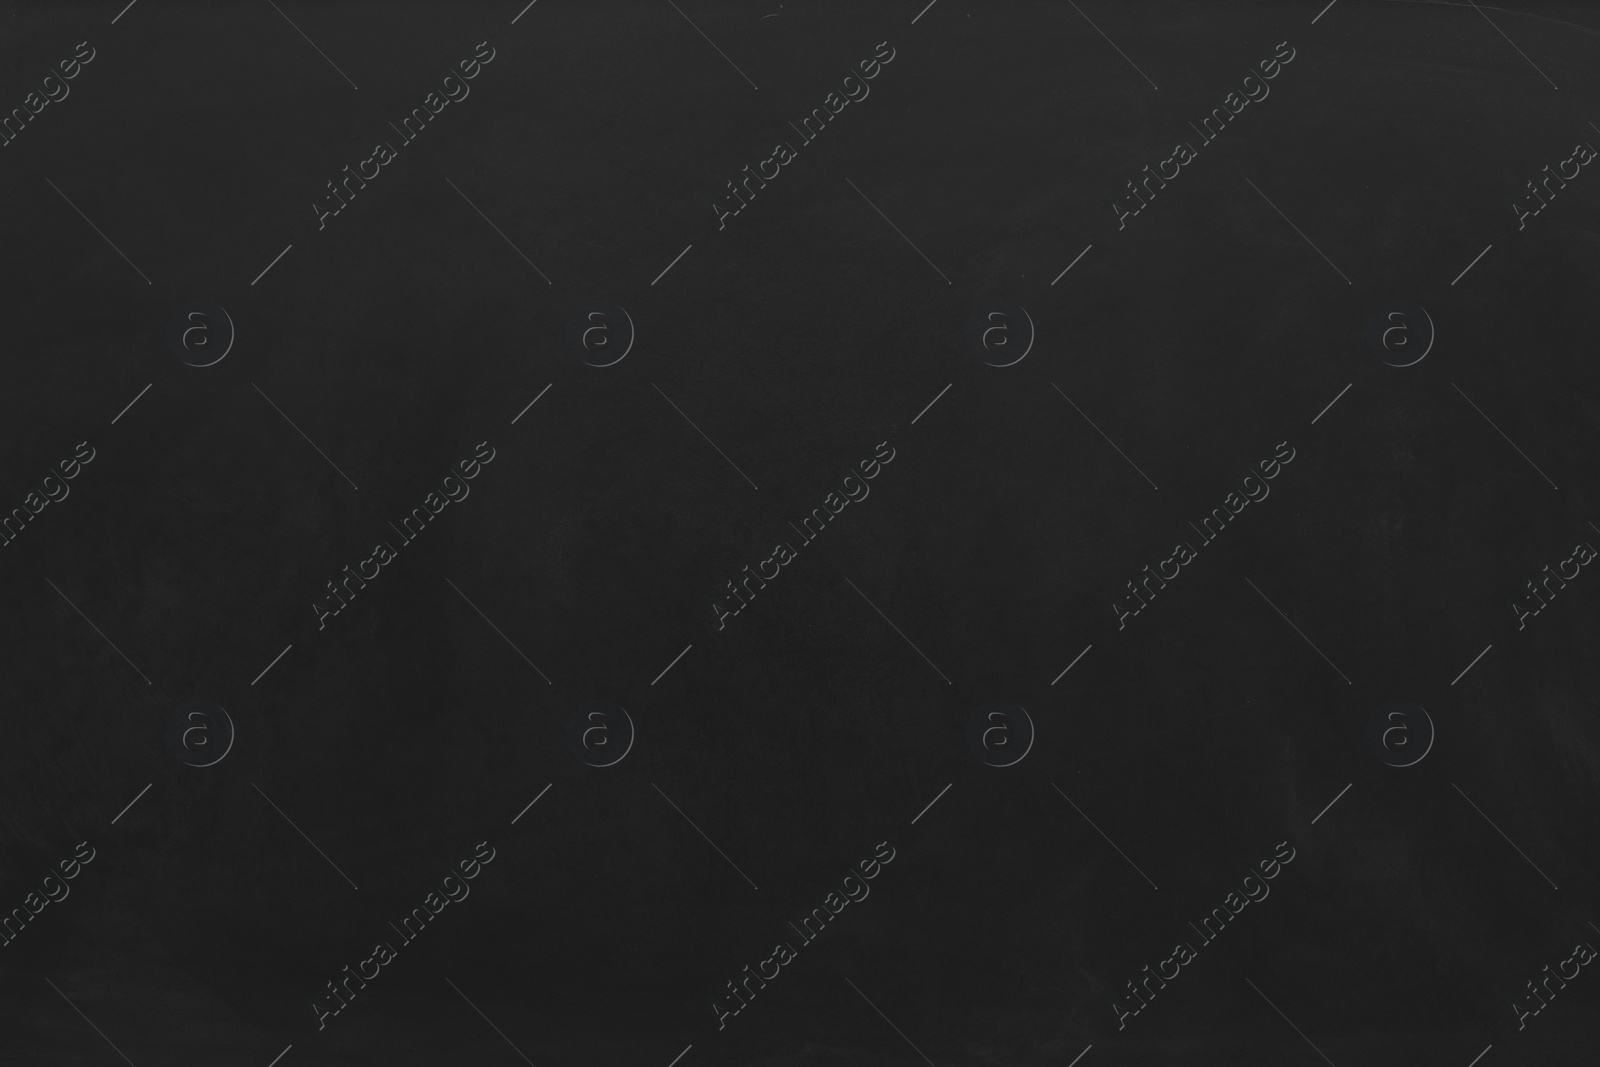 Photo of Blank black chalkboard as background. Space for text